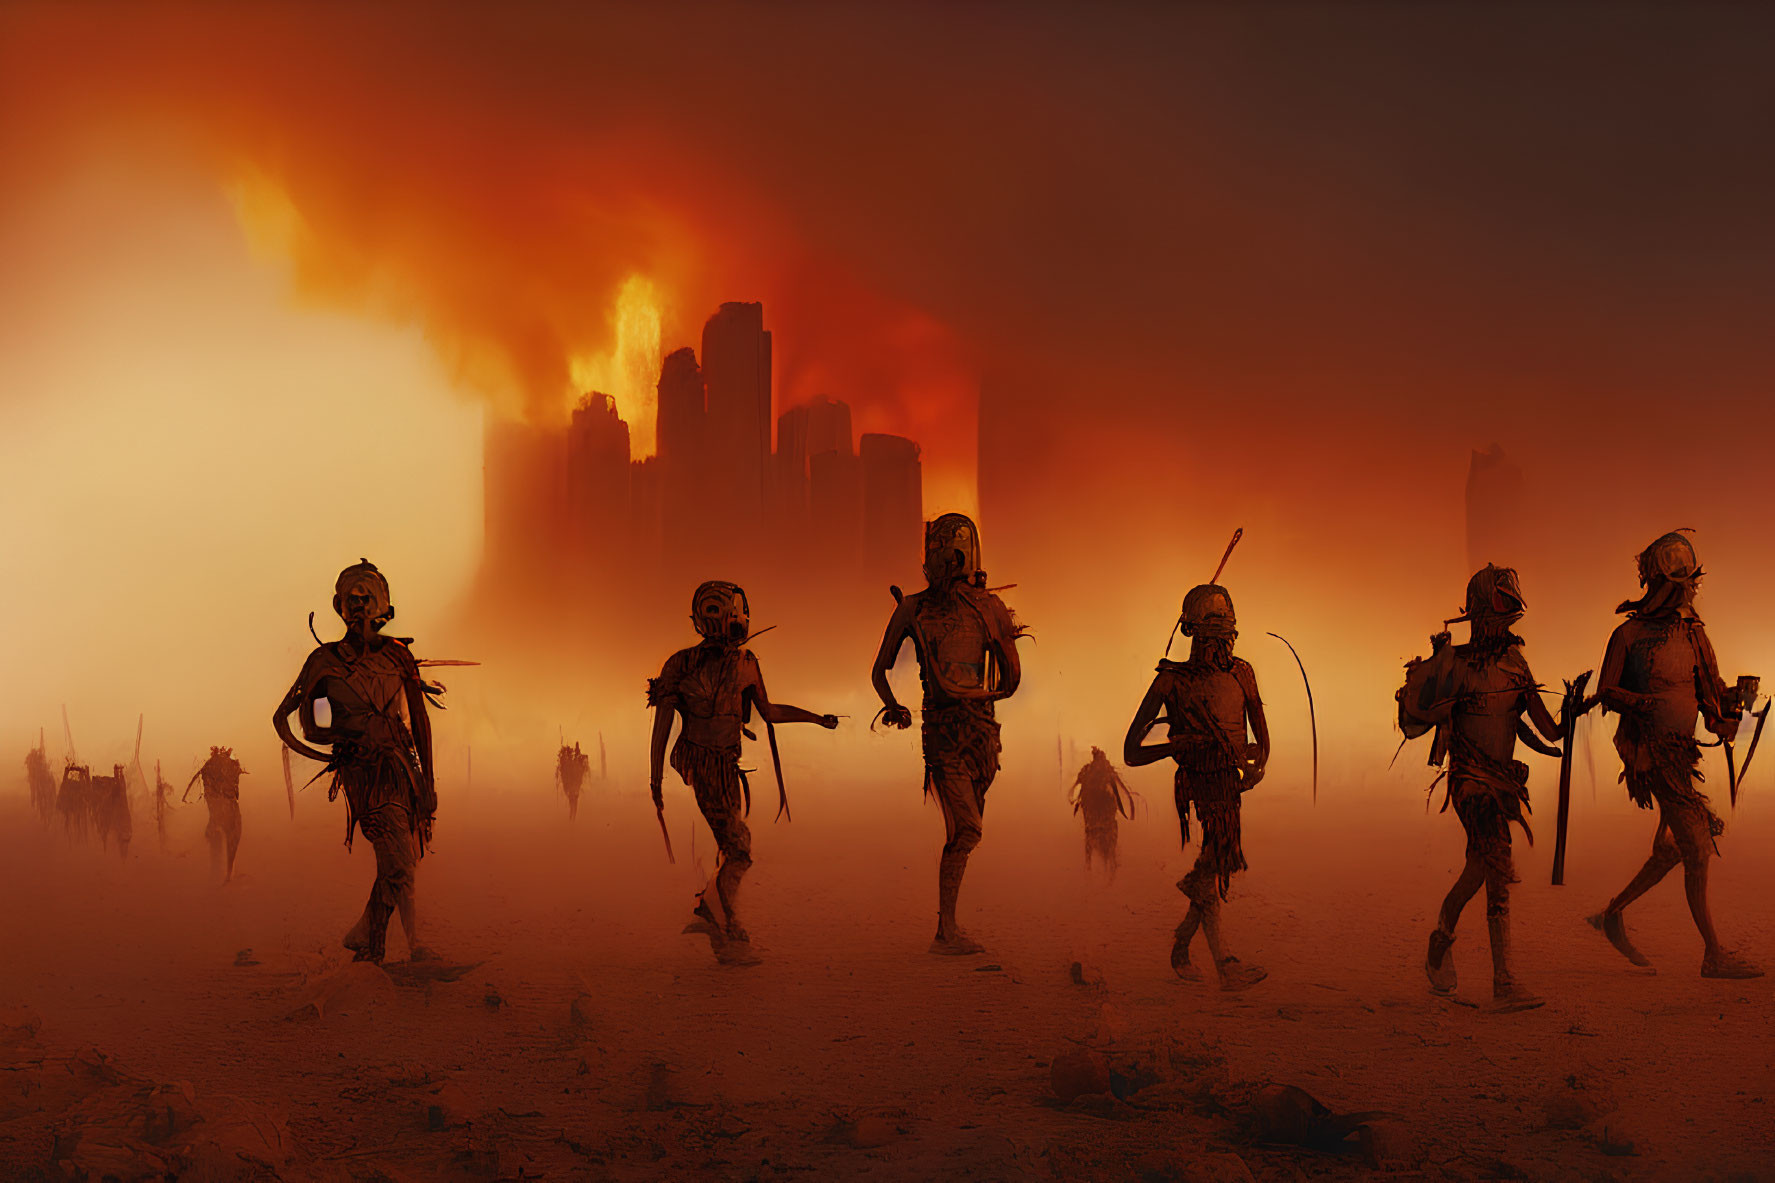 Tribal warriors in apocalyptic landscape with city silhouette & fiery skies